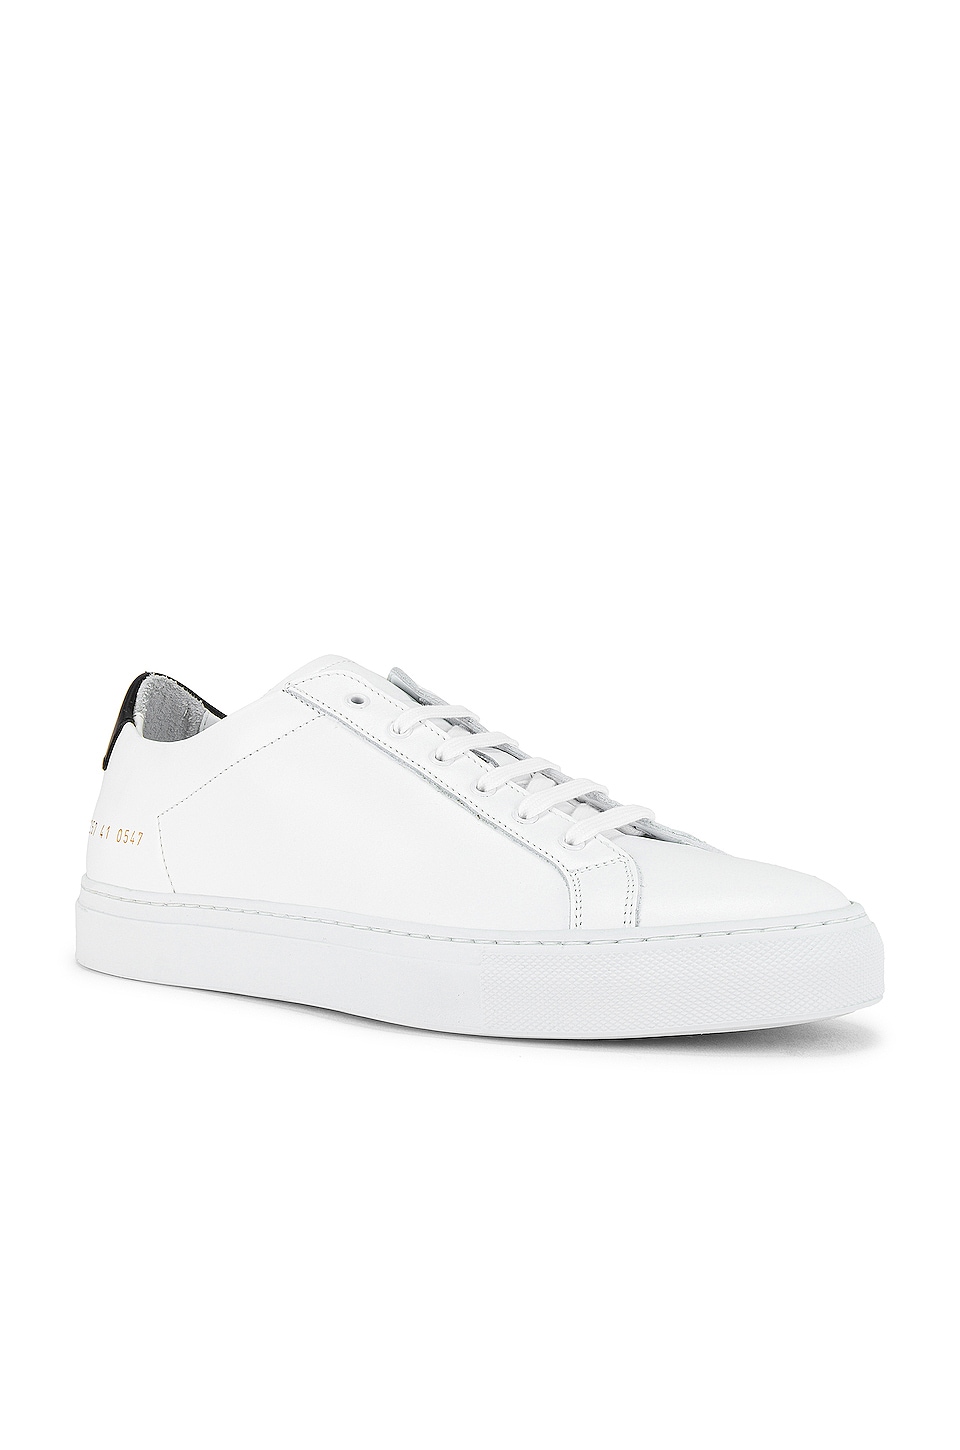 common projects retro low white